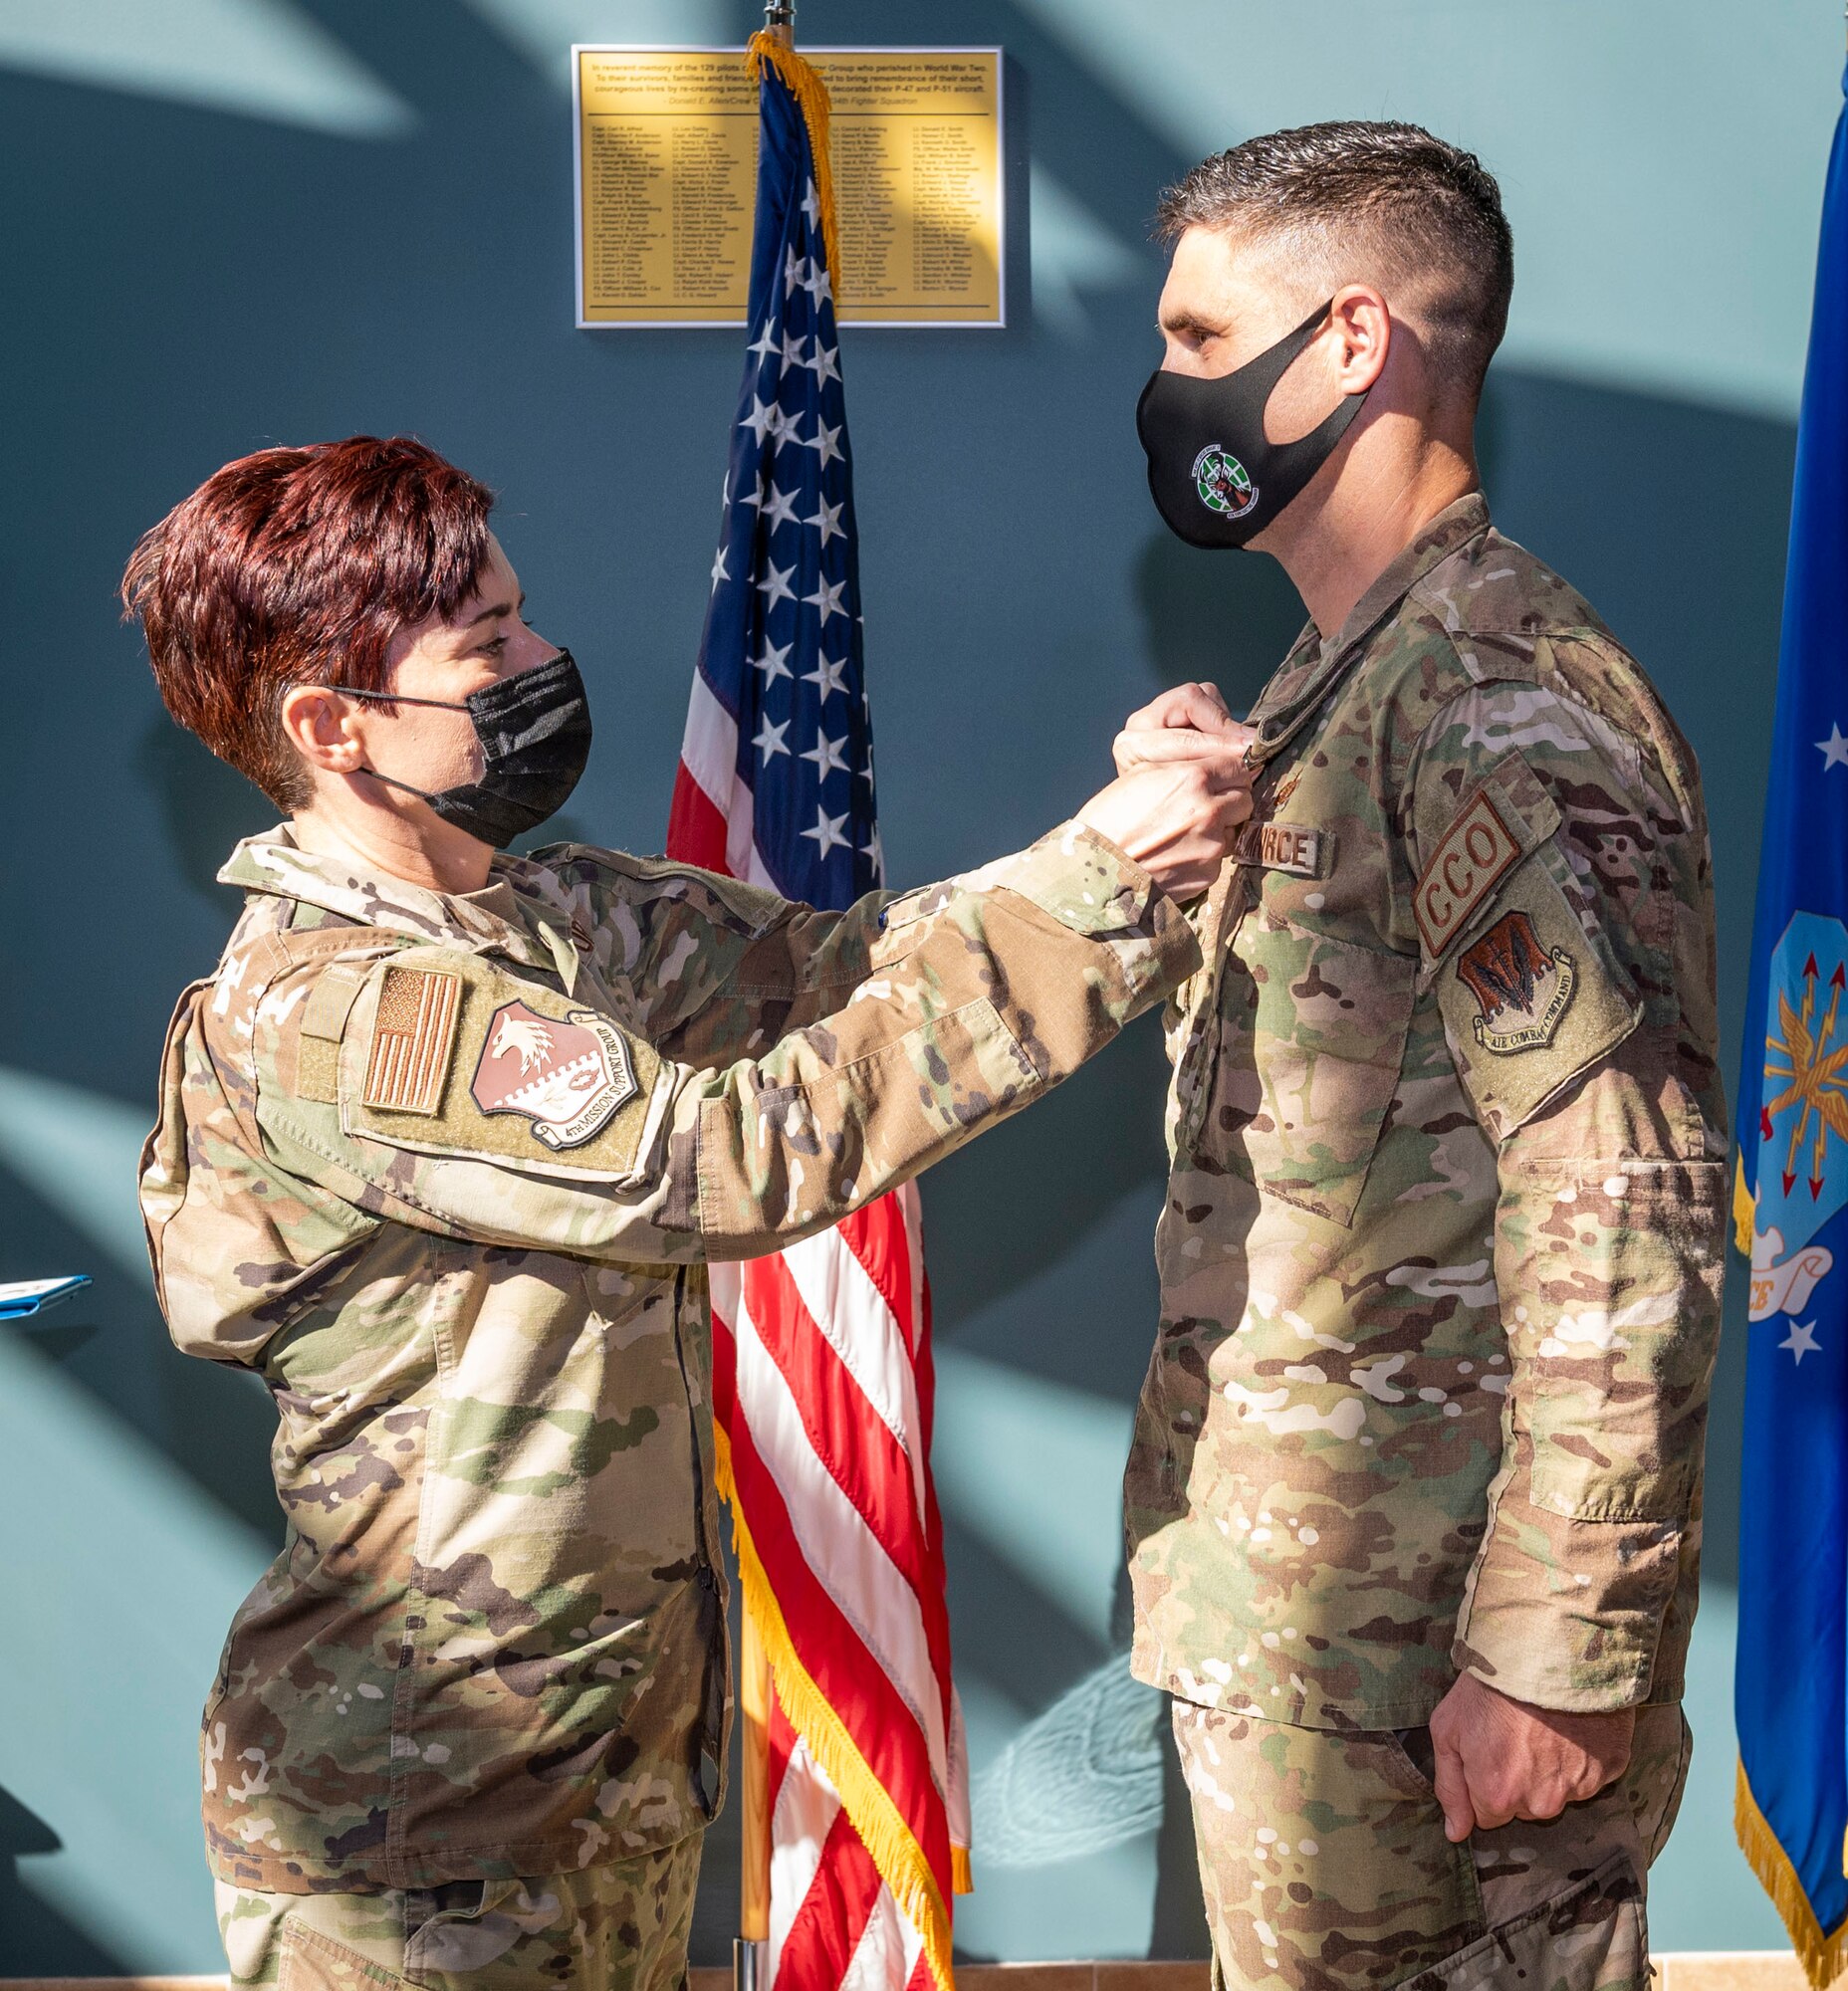 Col. Tammy McElhaney, left, 4th Mission Support Group commander, pins the Legion of Merit medal on Lt. Col. Michael Hawkins, outgoing 4th Contracting Squadron commander, during a change of command ceremony at Seymour Johnson Air Force Base, North Carolina, July 29, 2022. During his command, Hawkins provided contract support for over $3 billion in assets and ensured execution of an annual operations and maintenance budget of $90 million. (U.S. Air Force photo by Airman 1st Class Sabrina Fuller)